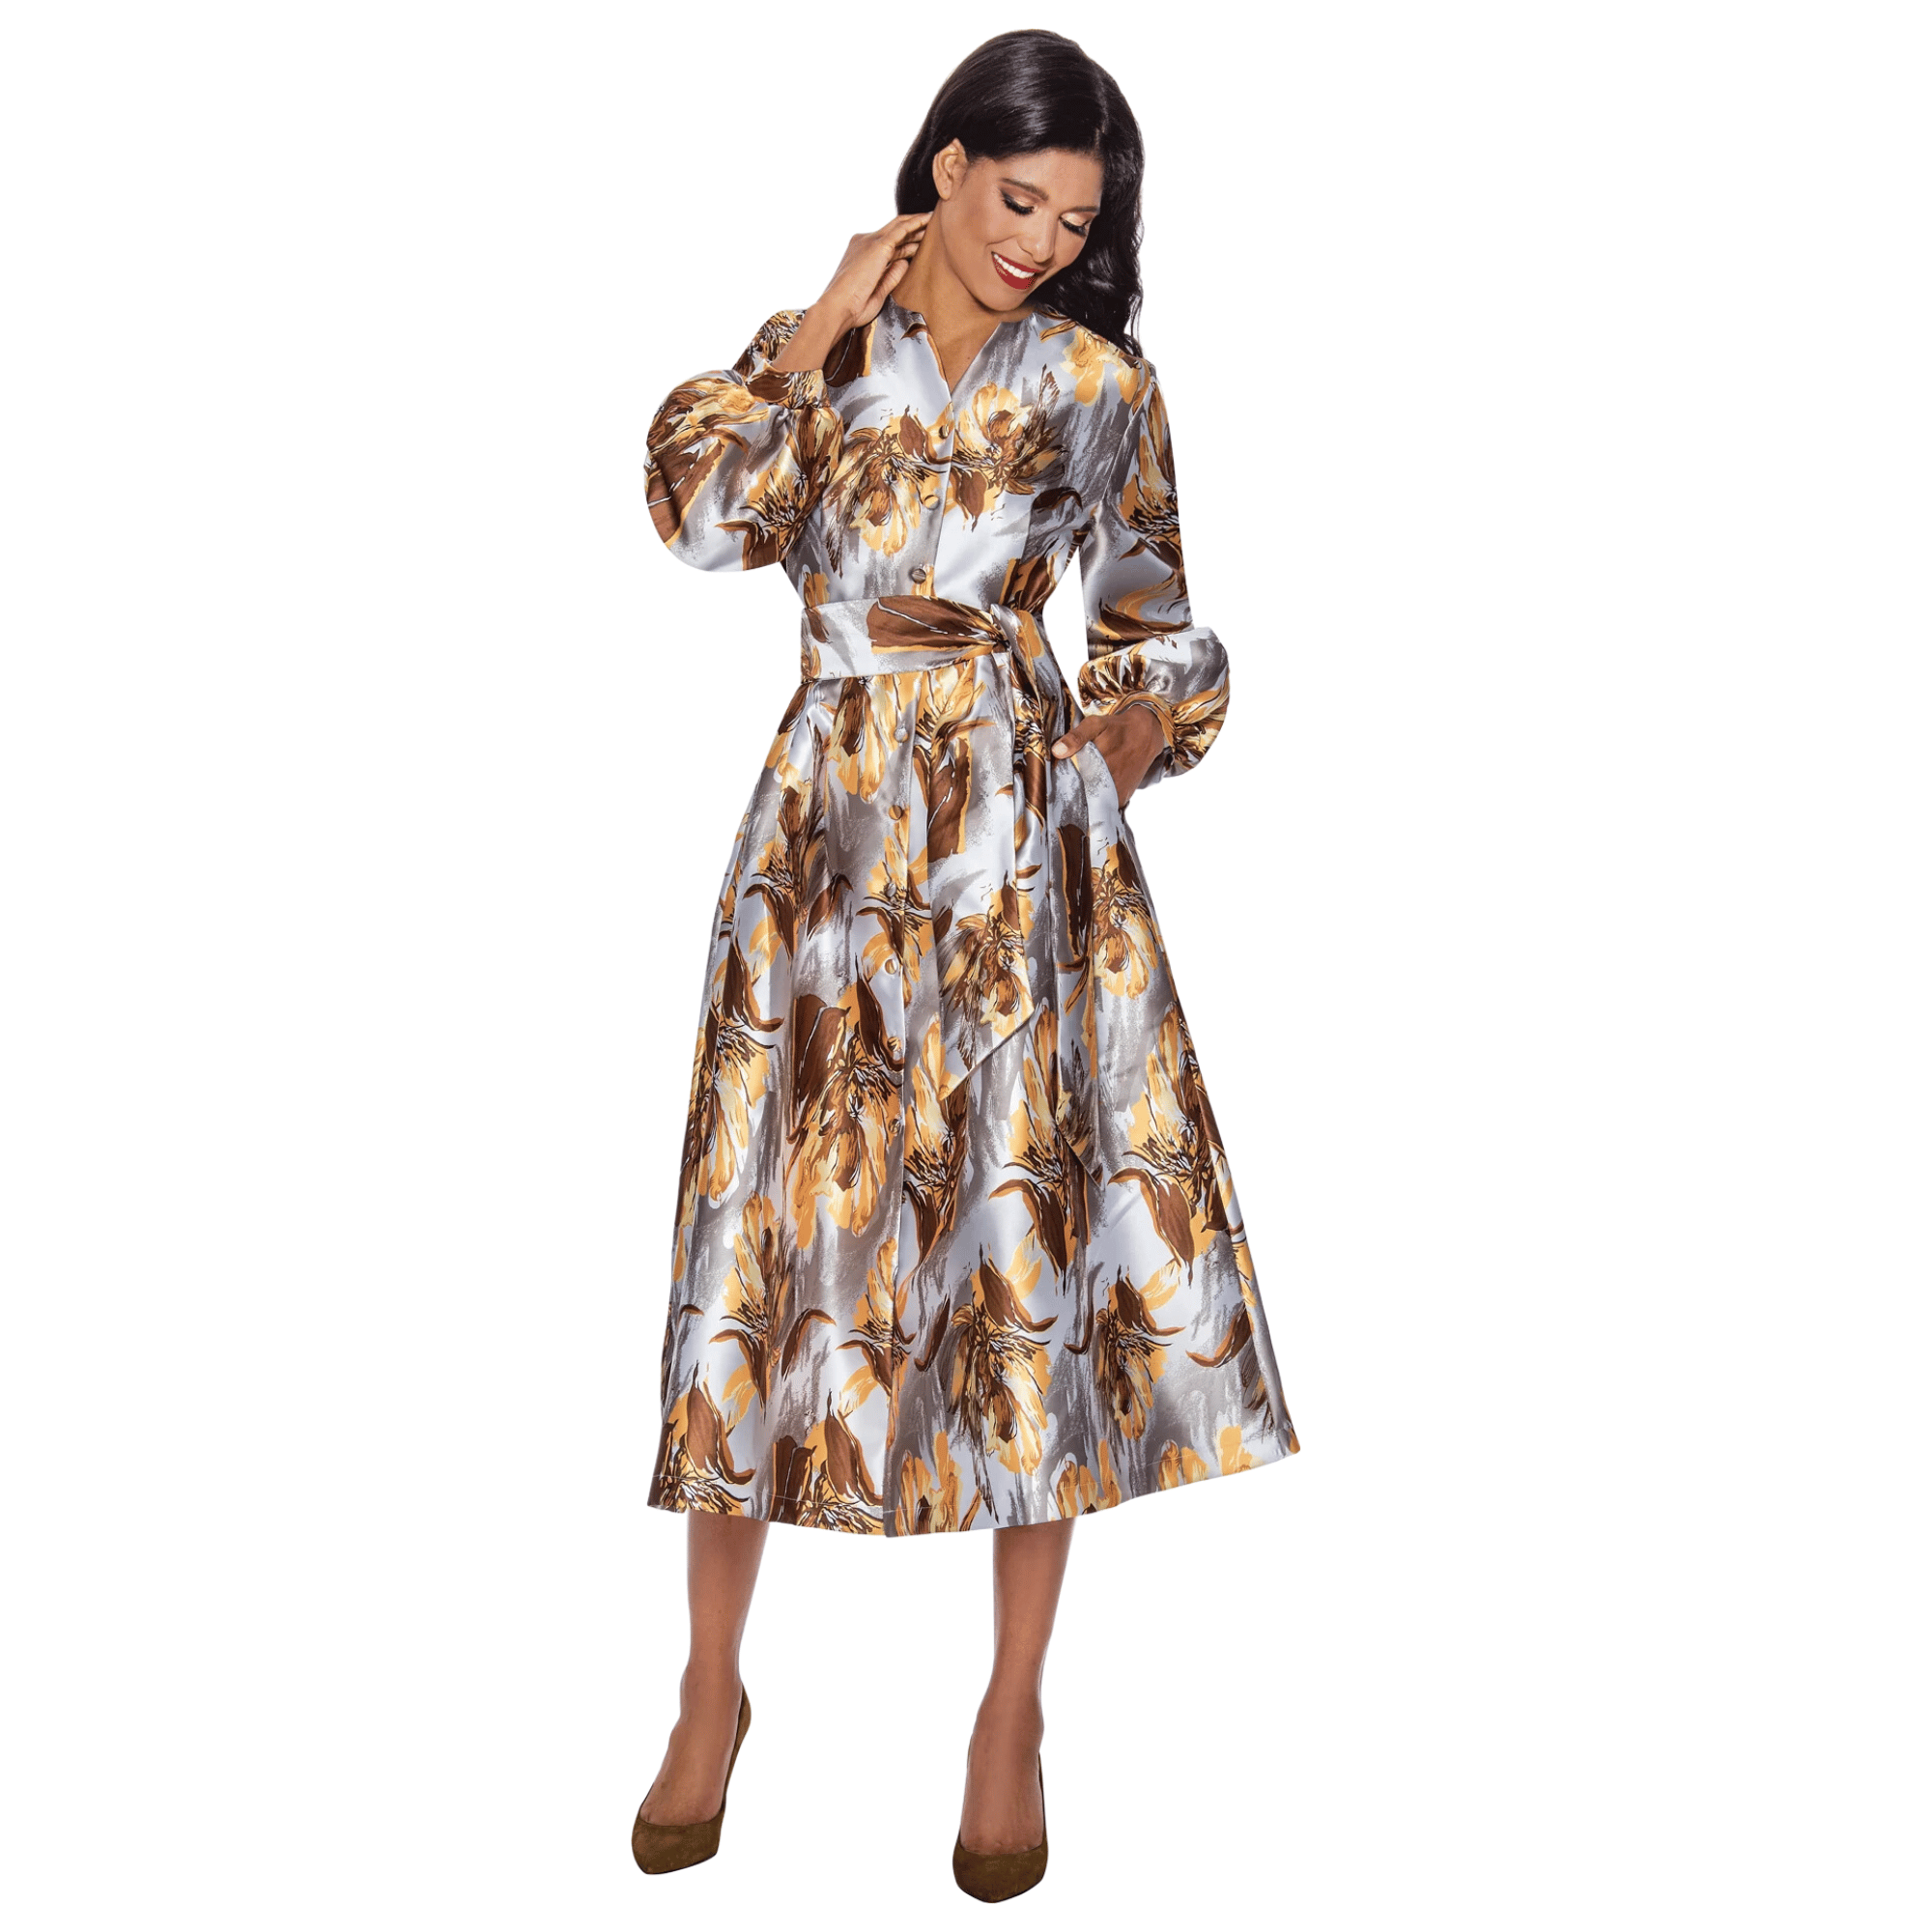 Dresses by Nubiano Belted Print Dress The Immediate Resource